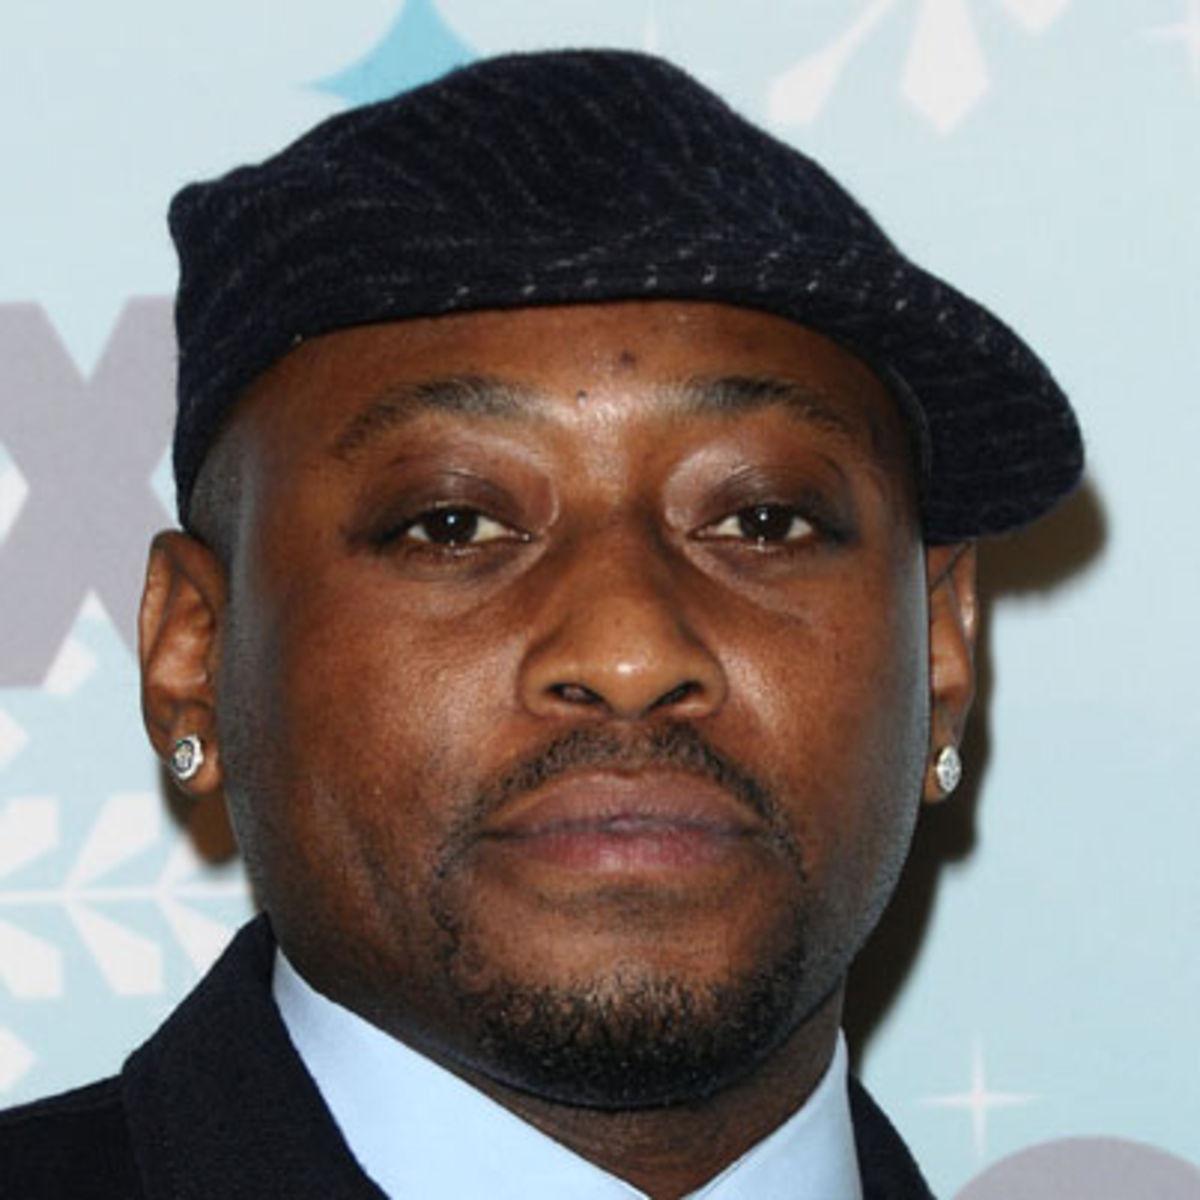 Pictures of Omar Epps.